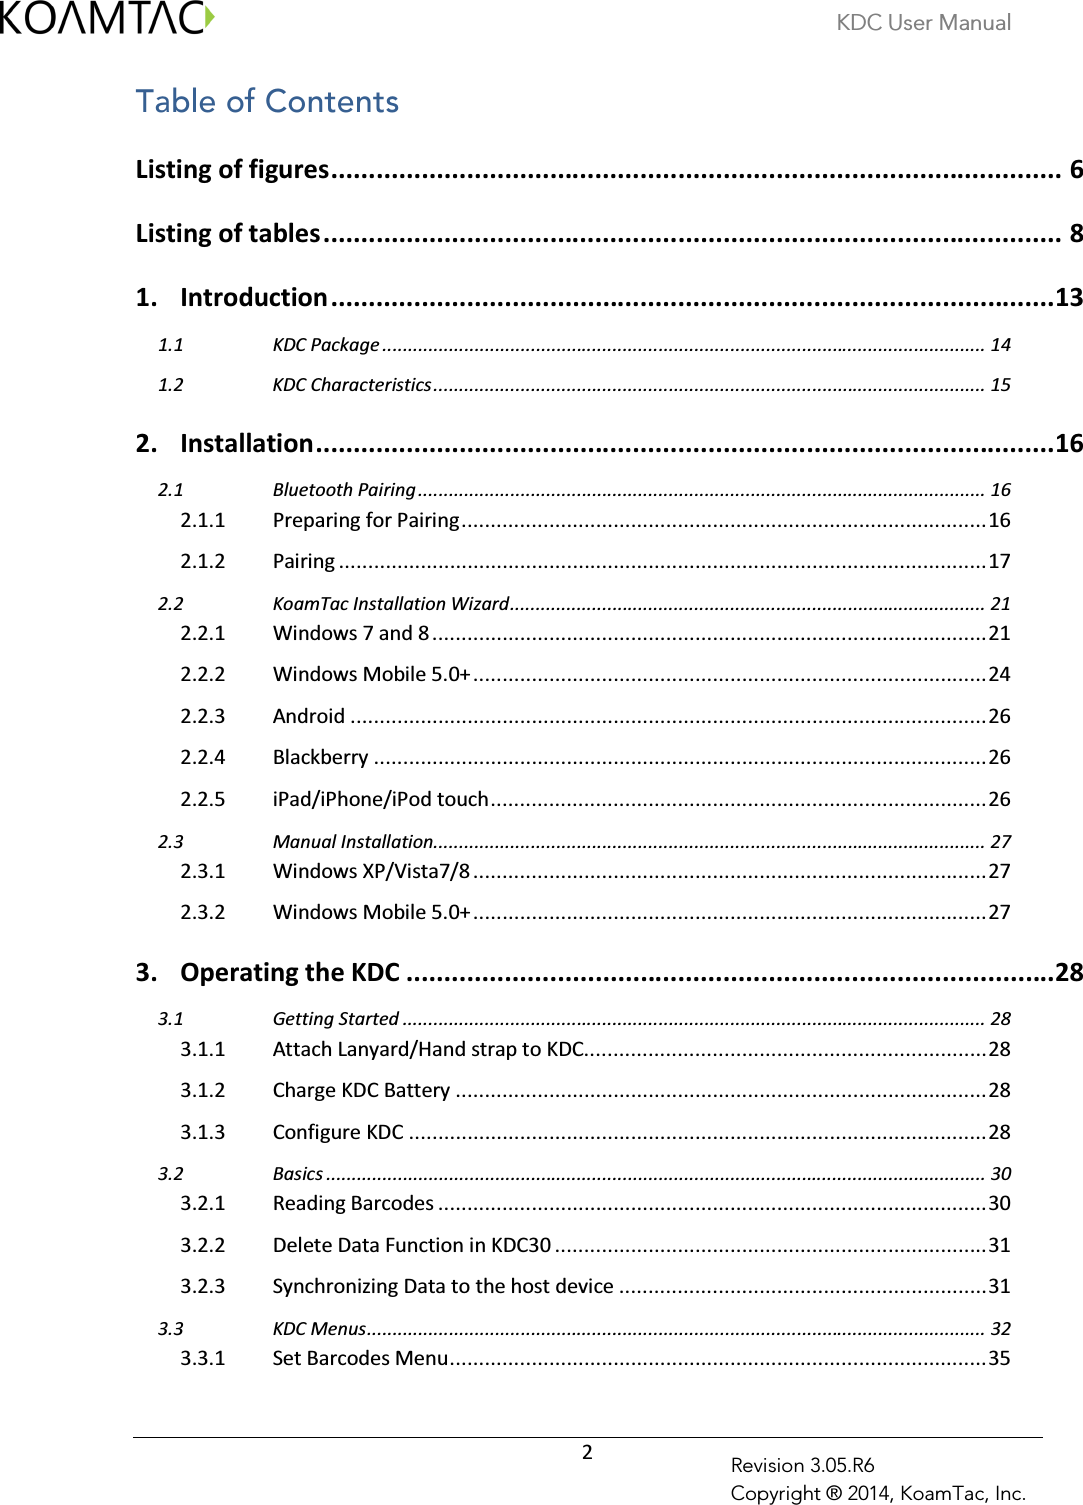 KDC User Manual  2 Revision 3.05.R6 Copyright ® 2014, KoamTac, Inc. Table of Contents  Listing of figures ................................................................................................. 6 Listing of tables .................................................................................................. 8 1. Introduction ................................................................................................ 13  KDC Package ...................................................................................................................... 14 1.1 KDC Characteristics ............................................................................................................ 15 1.22. Installation .................................................................................................. 16  Bluetooth Pairing ............................................................................................................... 16 2.12.1.1 Preparing for Pairing .......................................................................................... 16 2.1.2 Pairing ............................................................................................................... 17  KoamTac Installation Wizard ............................................................................................. 21 2.22.2.1 Windows 7 and 8 ............................................................................................... 21 2.2.2 Windows Mobile 5.0+ ........................................................................................ 24 2.2.3 Android ............................................................................................................. 26 2.2.4 Blackberry ......................................................................................................... 26 2.2.5 iPad/iPhone/iPod touch ..................................................................................... 26  Manual Installation............................................................................................................ 27 2.32.3.1 Windows XP/Vista7/8 ........................................................................................ 27 2.3.2 Windows Mobile 5.0+ ........................................................................................ 27 3. Operating the KDC ...................................................................................... 28  Getting Started .................................................................................................................. 28 3.13.1.1 Attach Lanyard/Hand strap to KDC..................................................................... 28 3.1.2 Charge KDC Battery ........................................................................................... 28 3.1.3 Configure KDC ................................................................................................... 28  Basics ................................................................................................................................. 30 3.23.2.1 Reading Barcodes .............................................................................................. 30 3.2.2 Delete Data Function in KDC30 .......................................................................... 31 3.2.3 Synchronizing Data to the host device ............................................................... 31  KDC Menus ......................................................................................................................... 32 3.33.3.1 Set Barcodes Menu ............................................................................................ 35 